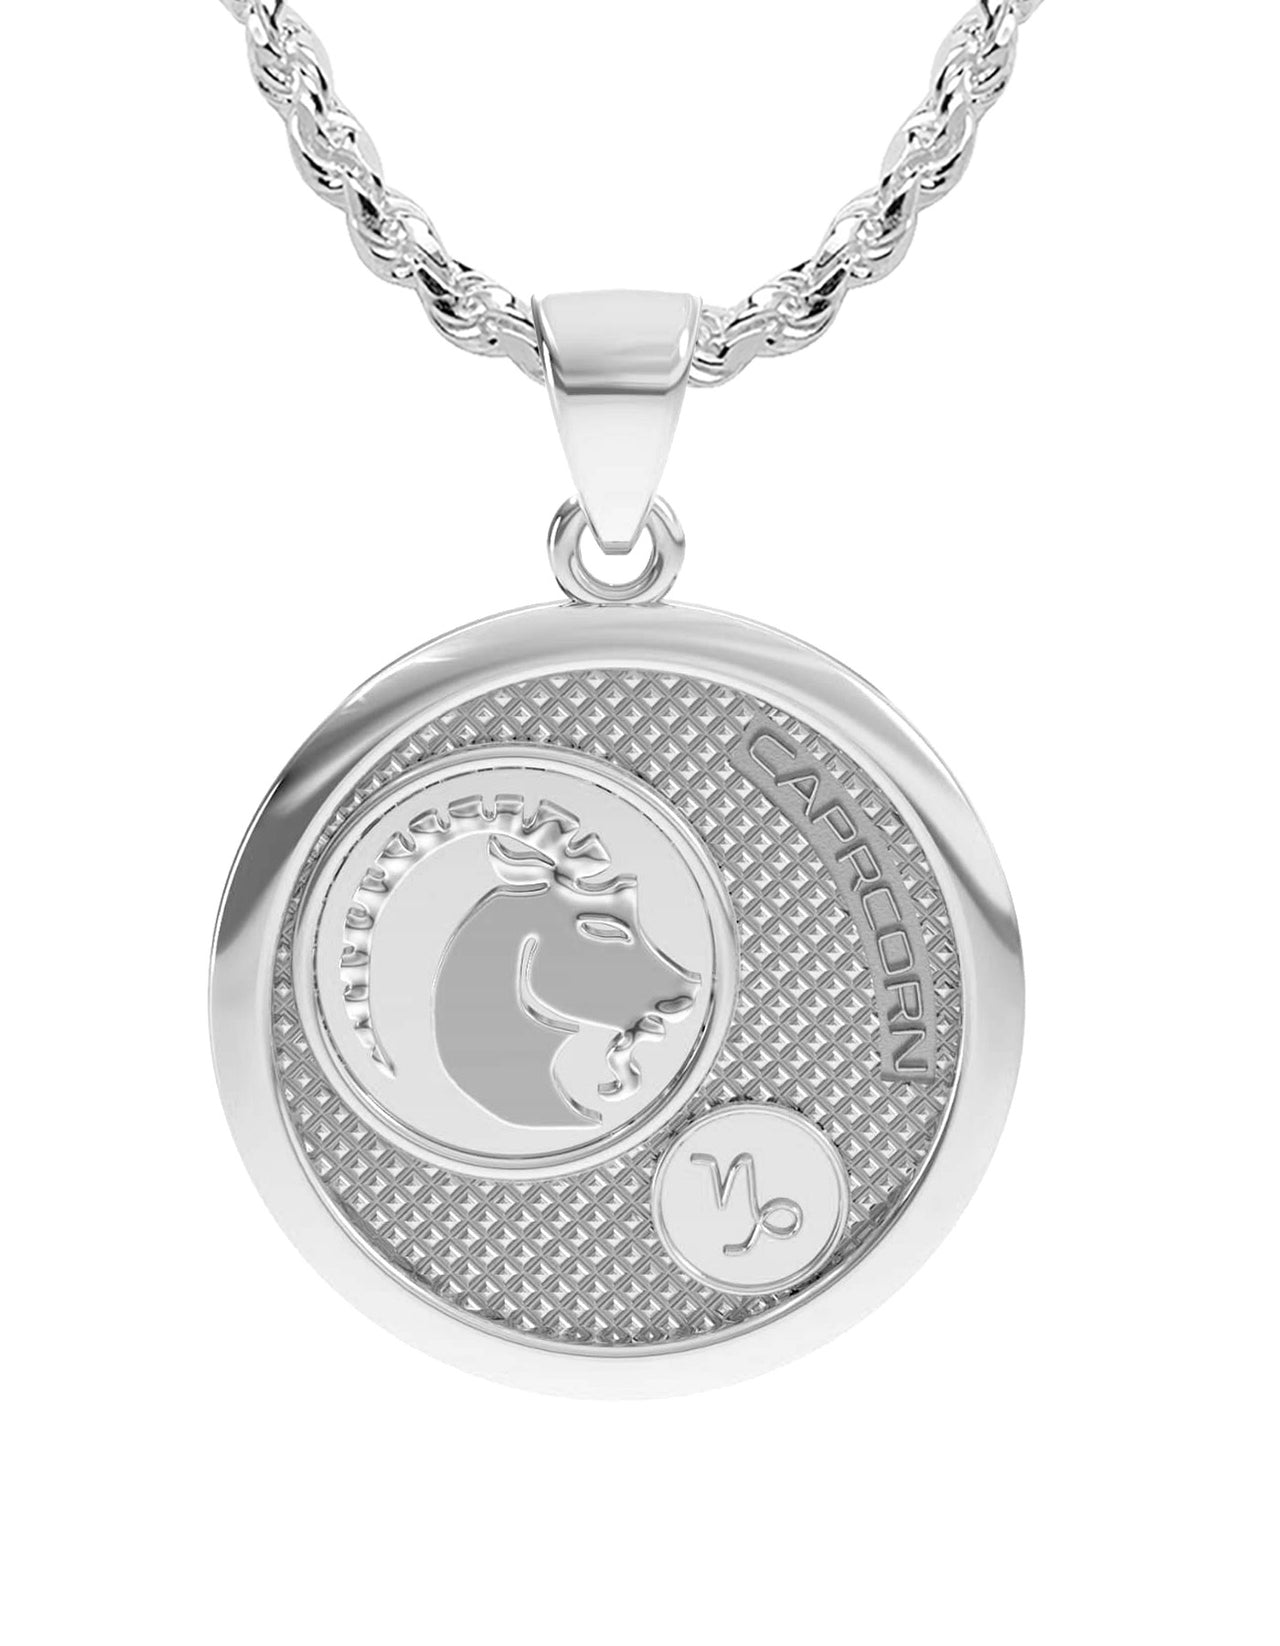 Ladies 925 Sterling Silver Round Capricorn Zodiac Polished Finish Pendant Necklace, 25mm